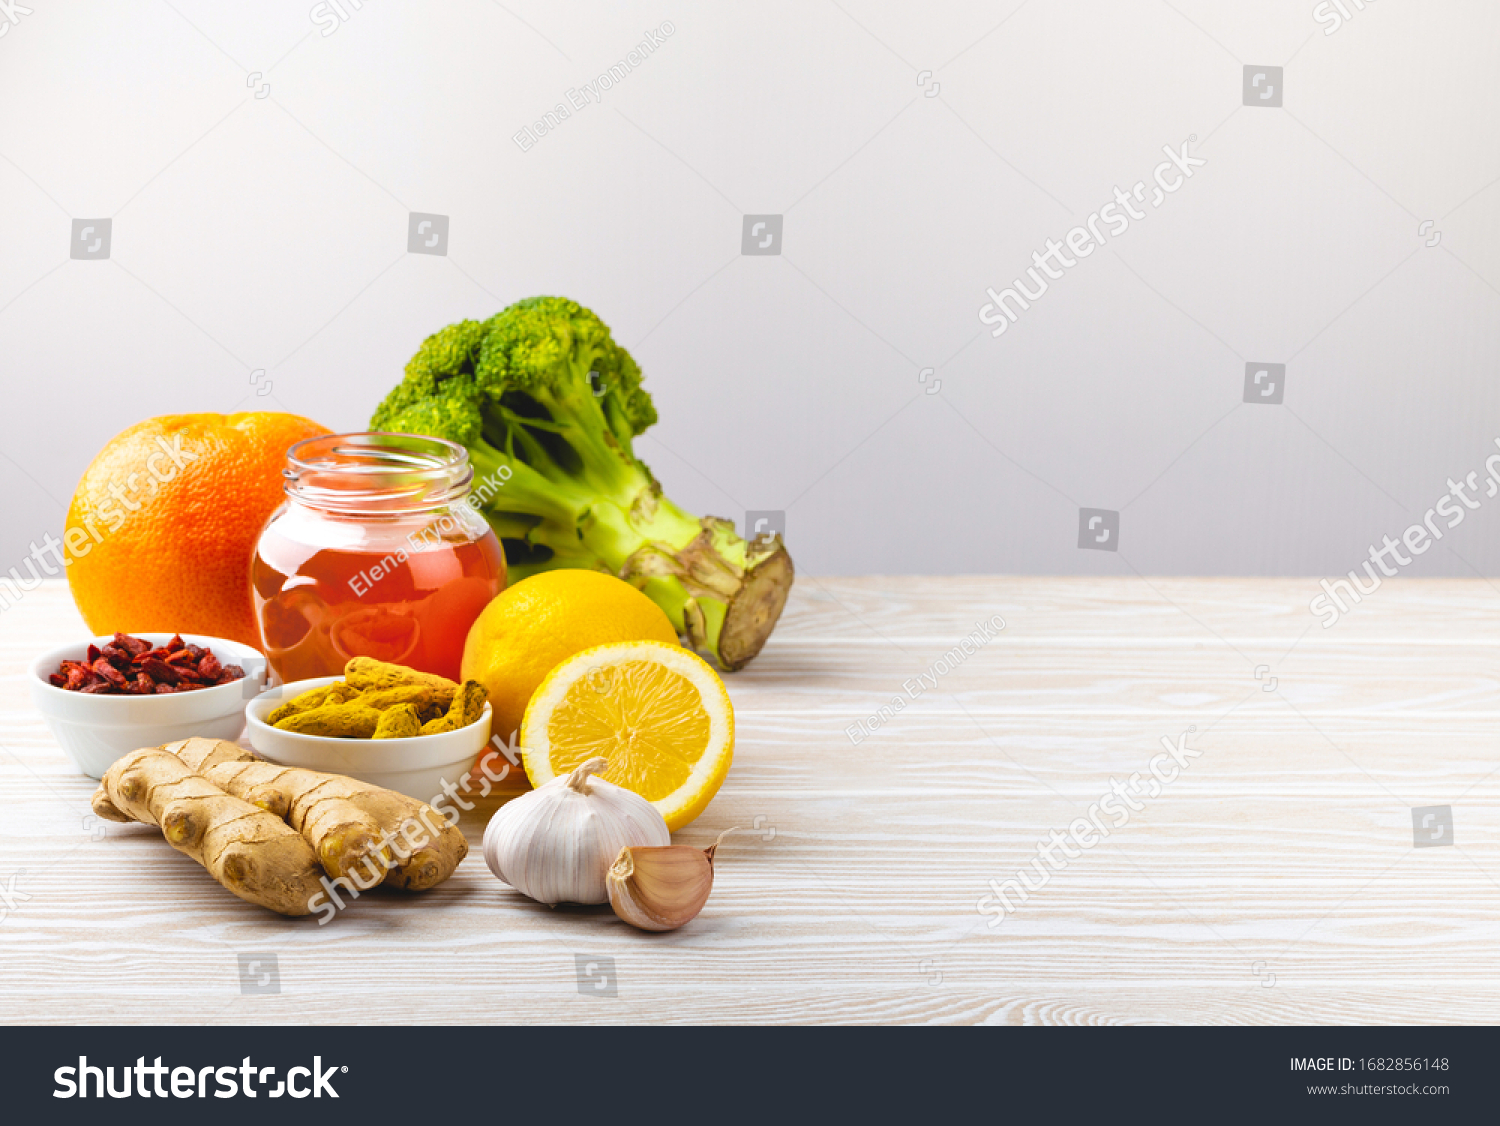 Food for immunity stimulation and viruses protection. Broccoli, citrus fruits, honey, ginger, lemon, garlic, goji, turmeric on white wooden background, copy space. Healthy food to boost immune system
 #1682856148